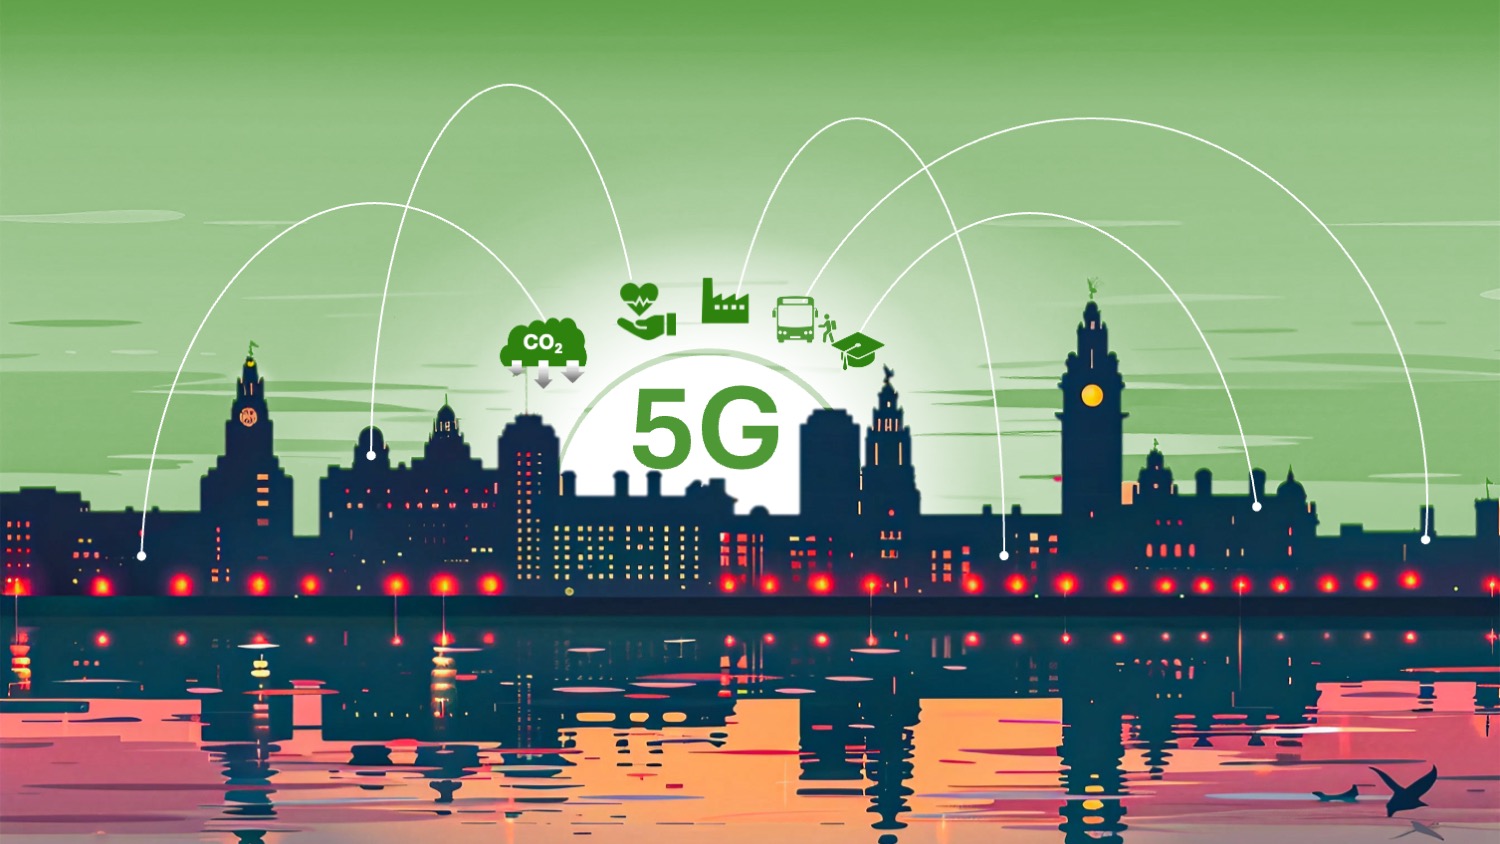 Cambium LLP Secures Innovate UK Funding and Partners with Liverpool 5G to Develop NetZeroNet (NZN)